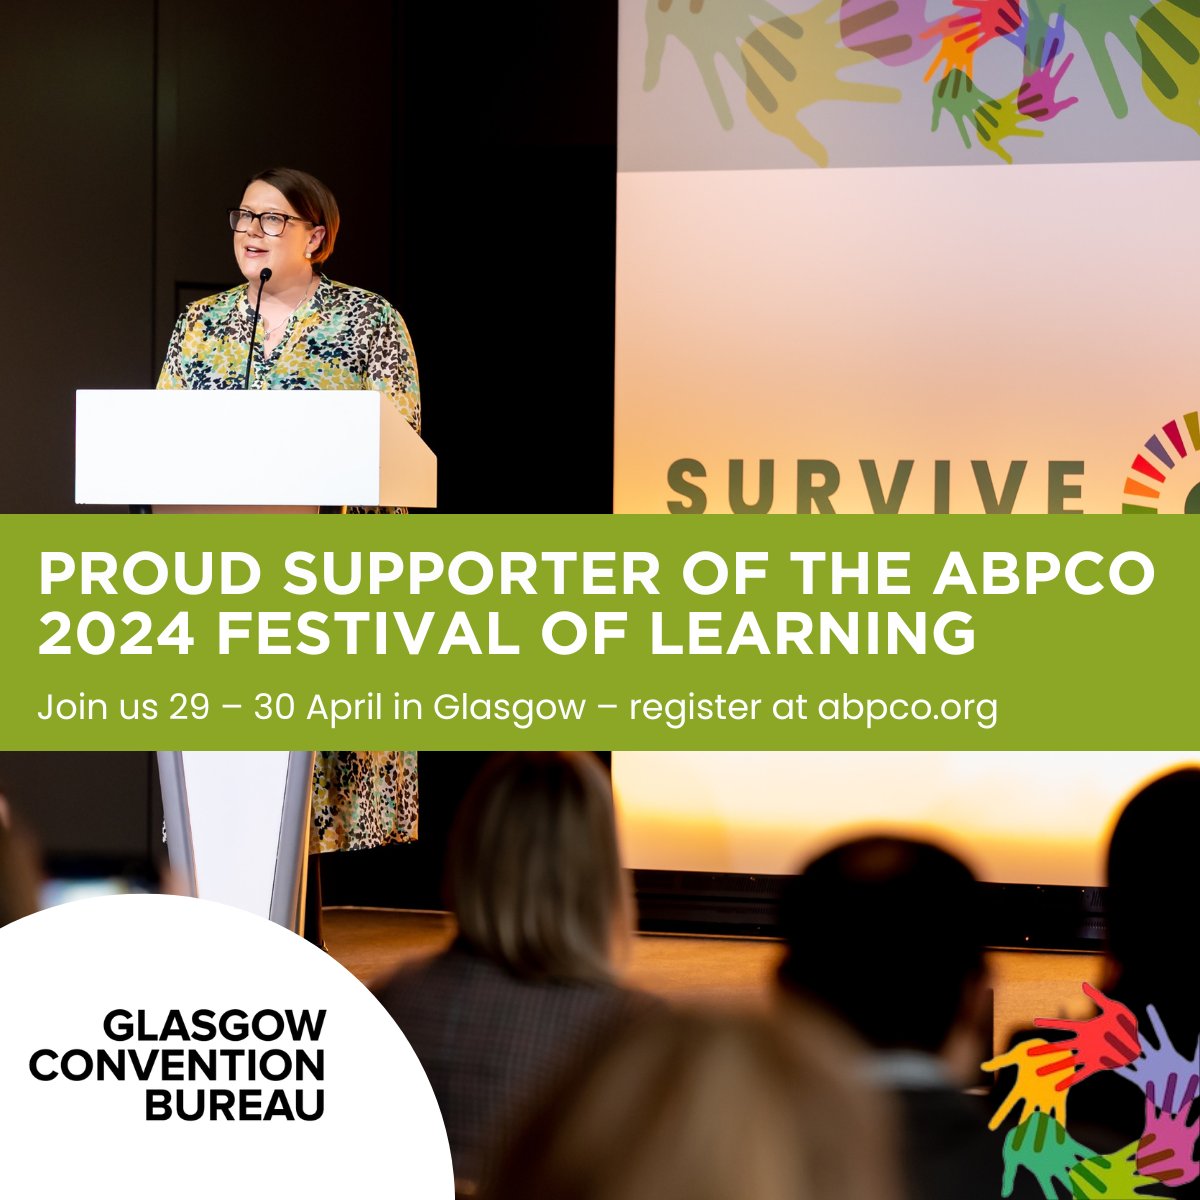 It's just 2 weeks until we welcome @ABPCO Festival of Learning to the @SECGlasgow and Glasgow. We can't wait to catch up with our industry friends! #ABPCO #FoL2024 #eventsindustry #festivaloflearning #eventprofs